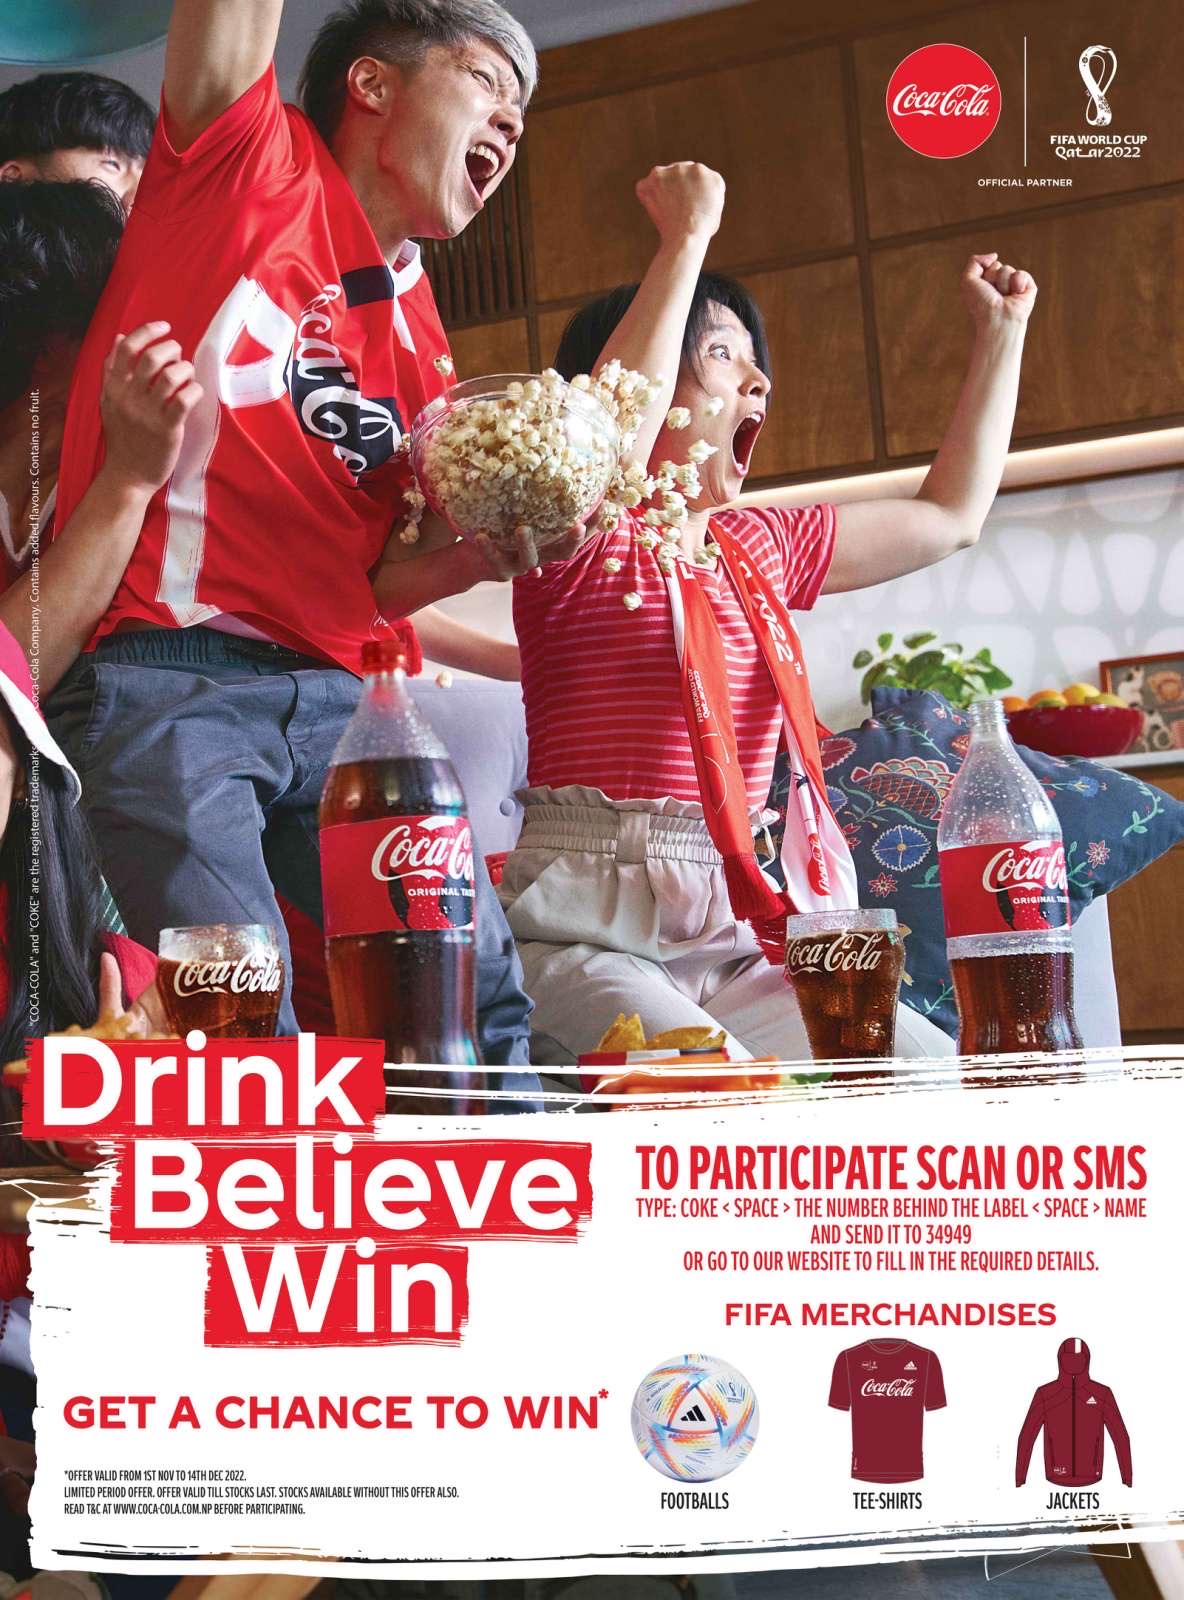 CocaCola kick starts “Drink, Believe, Win” campaign for FIFA World Cup